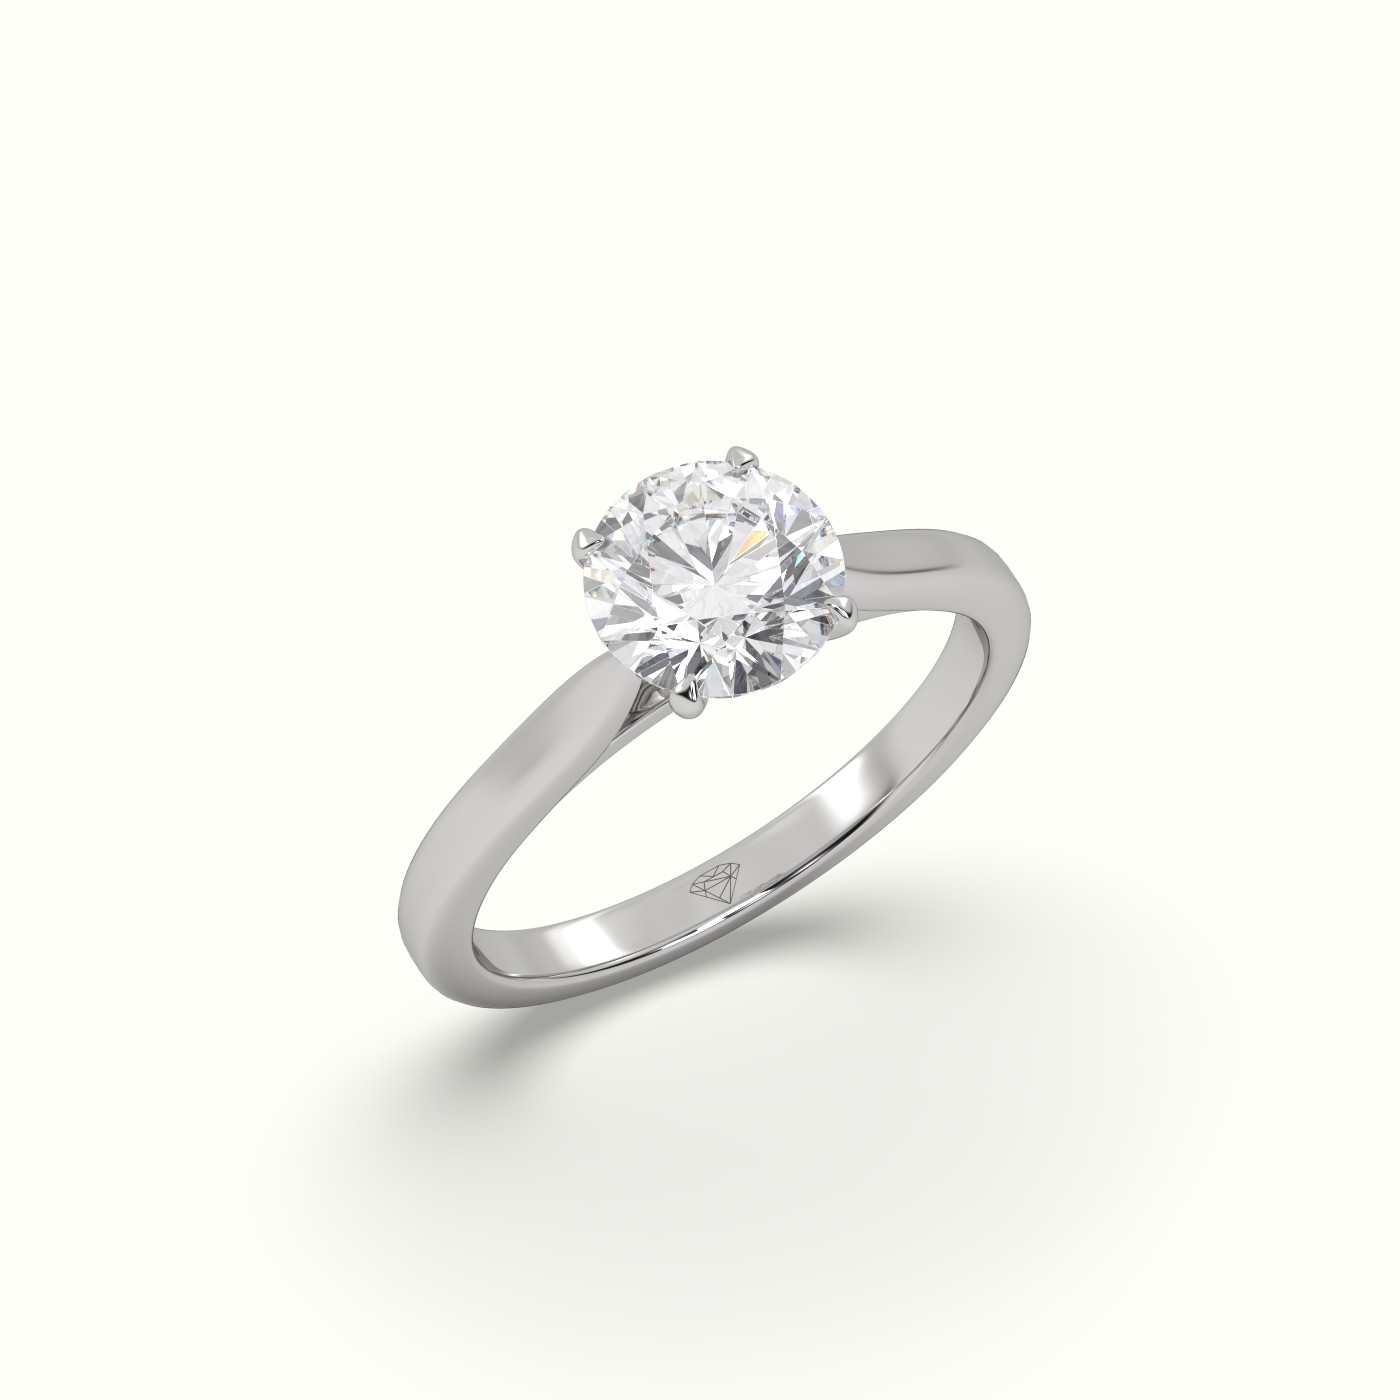 18K White Gold Round Solitaire Diamond 4 prongs Engagement Ring